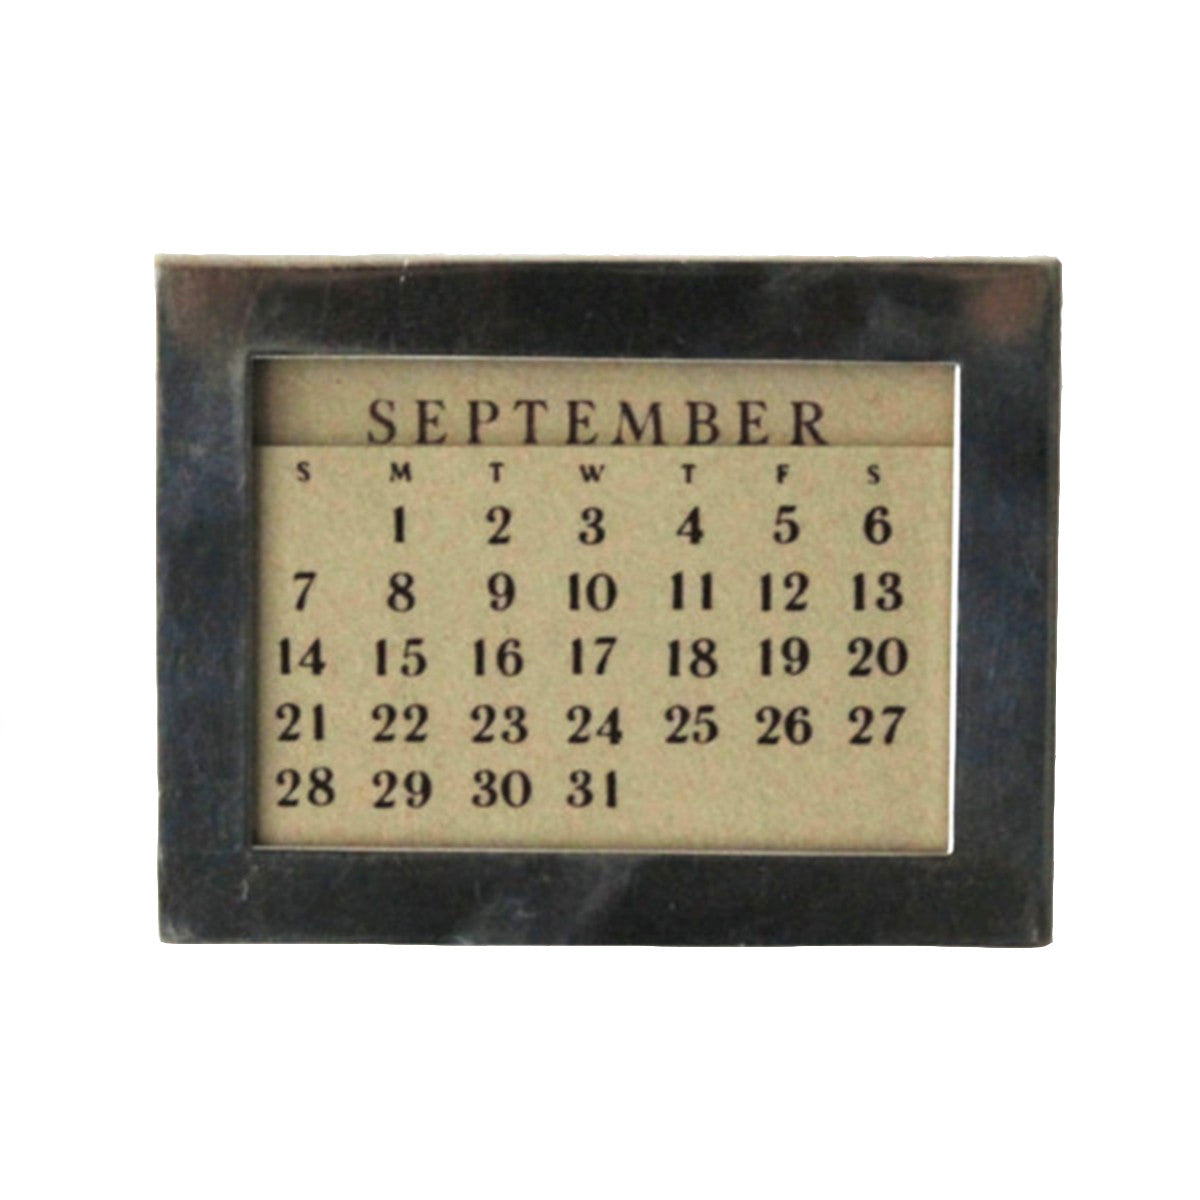 Vintage Sterling Silver Perpetual Desk Calendar. Signed Tiffany. All the month and day cards are included, everything in excellent condition. Gentle signs of age present.